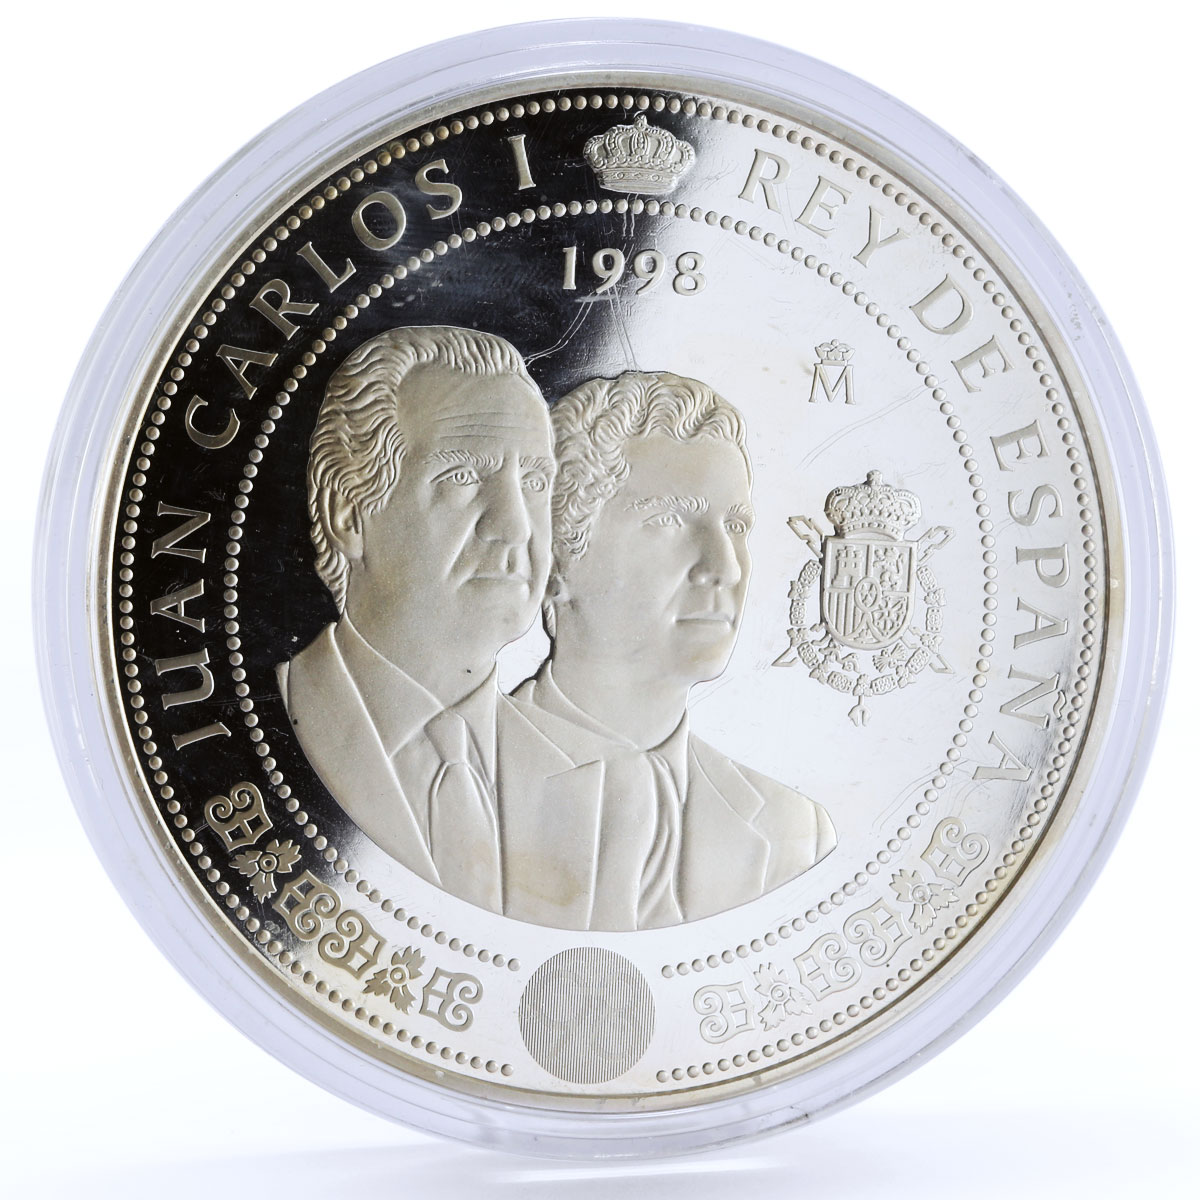 Spain 10000 pesetas 300th Anniversary of Bourbon Family proof silver coin 1998